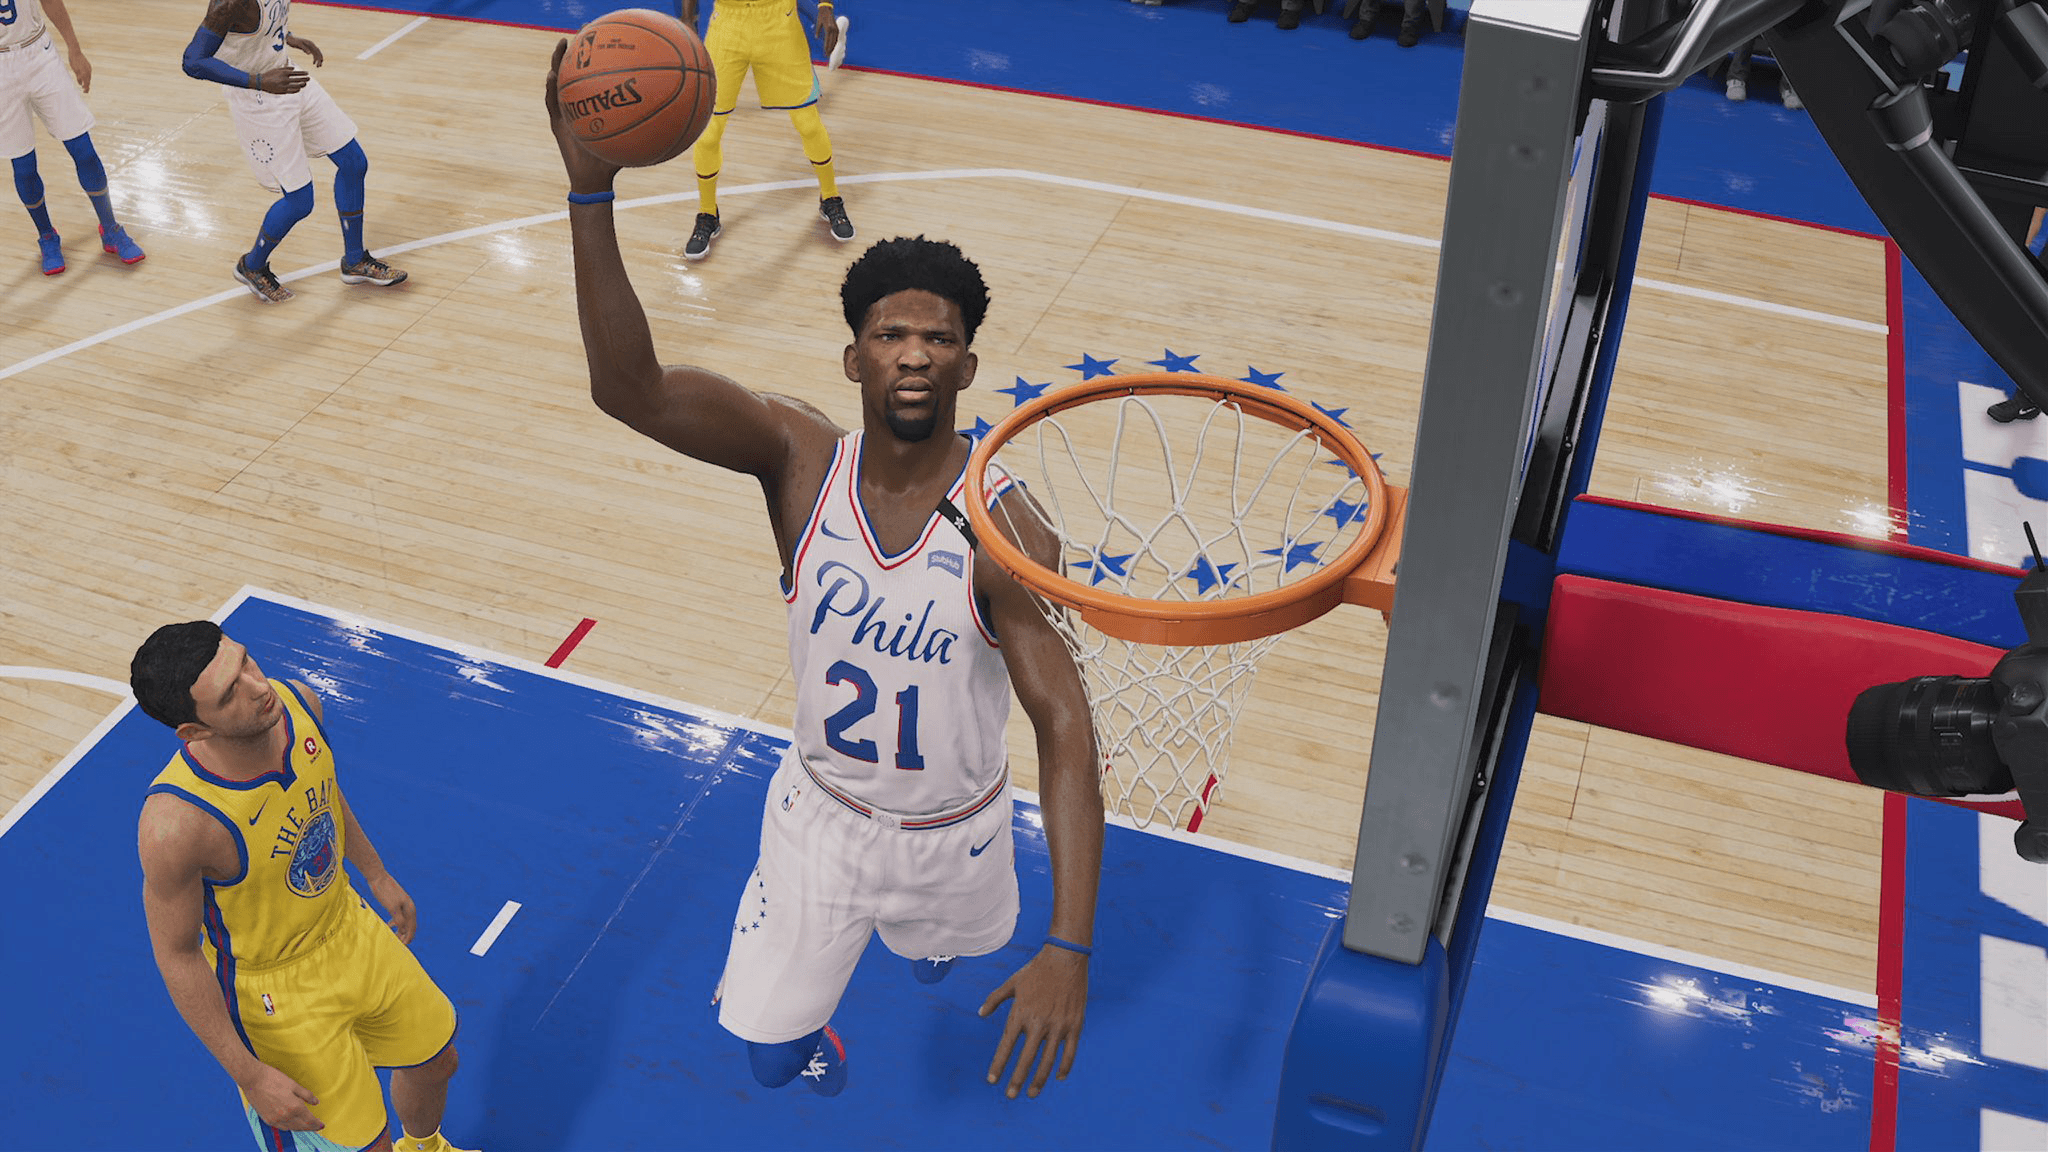 Latest NBA Live 19 Details & Cover Reveal